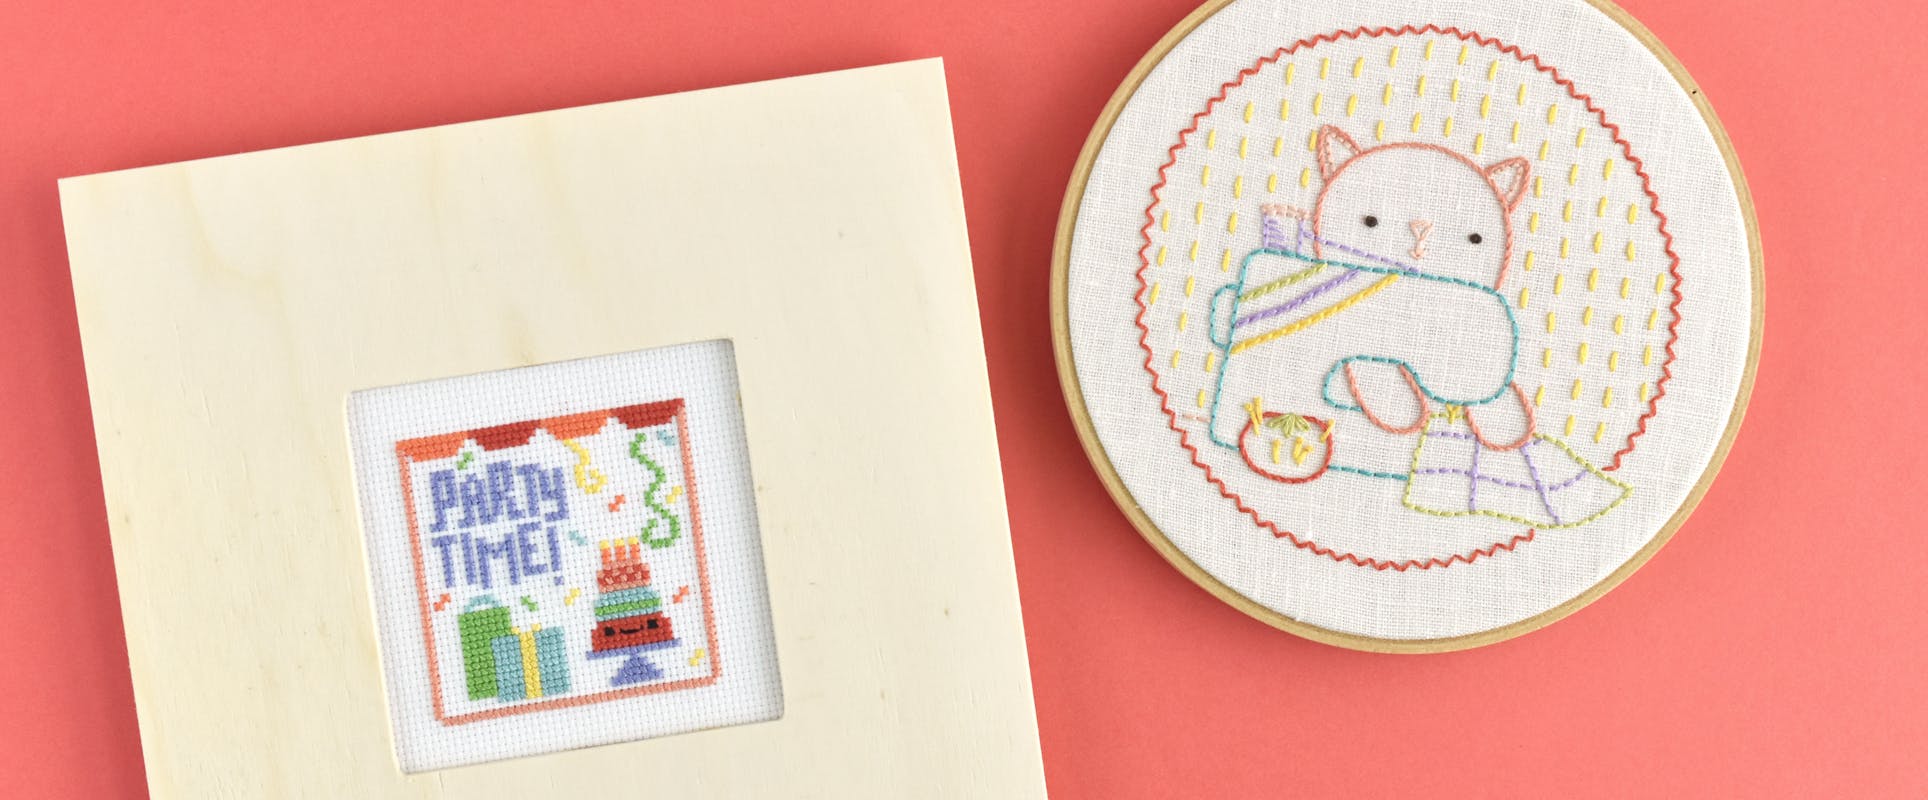 3/4 Finishing Tape for Cross Stitch and Embroidery - Stitched Modern